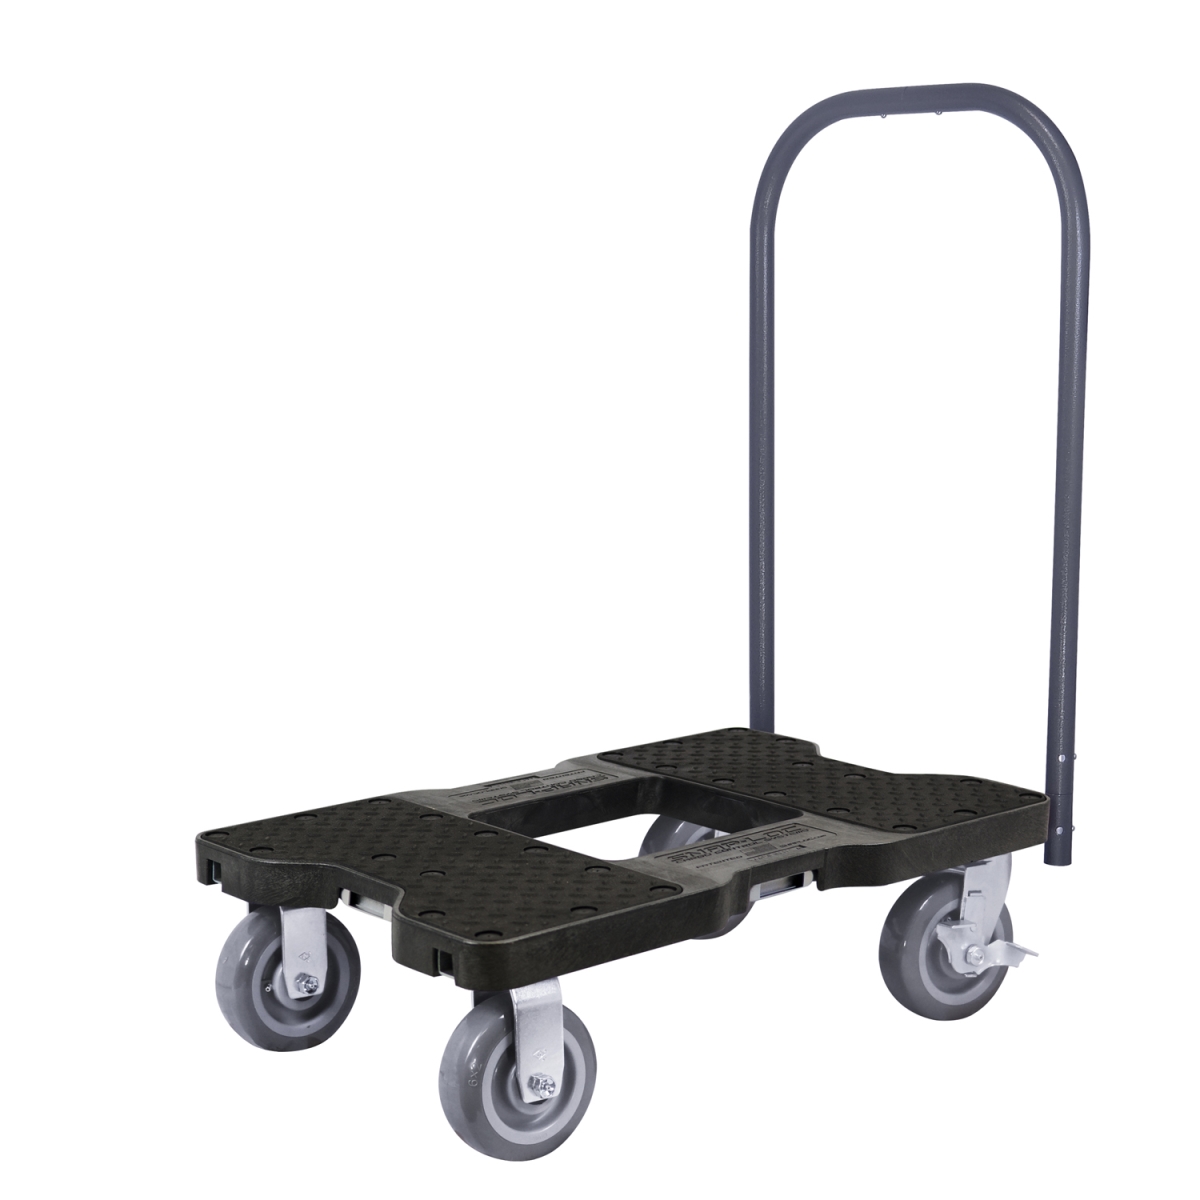 Picture of Snap-Loc SL1800P6B 1800 lbs Super-Duty Professional E-Track Push Cart Dolly - Black